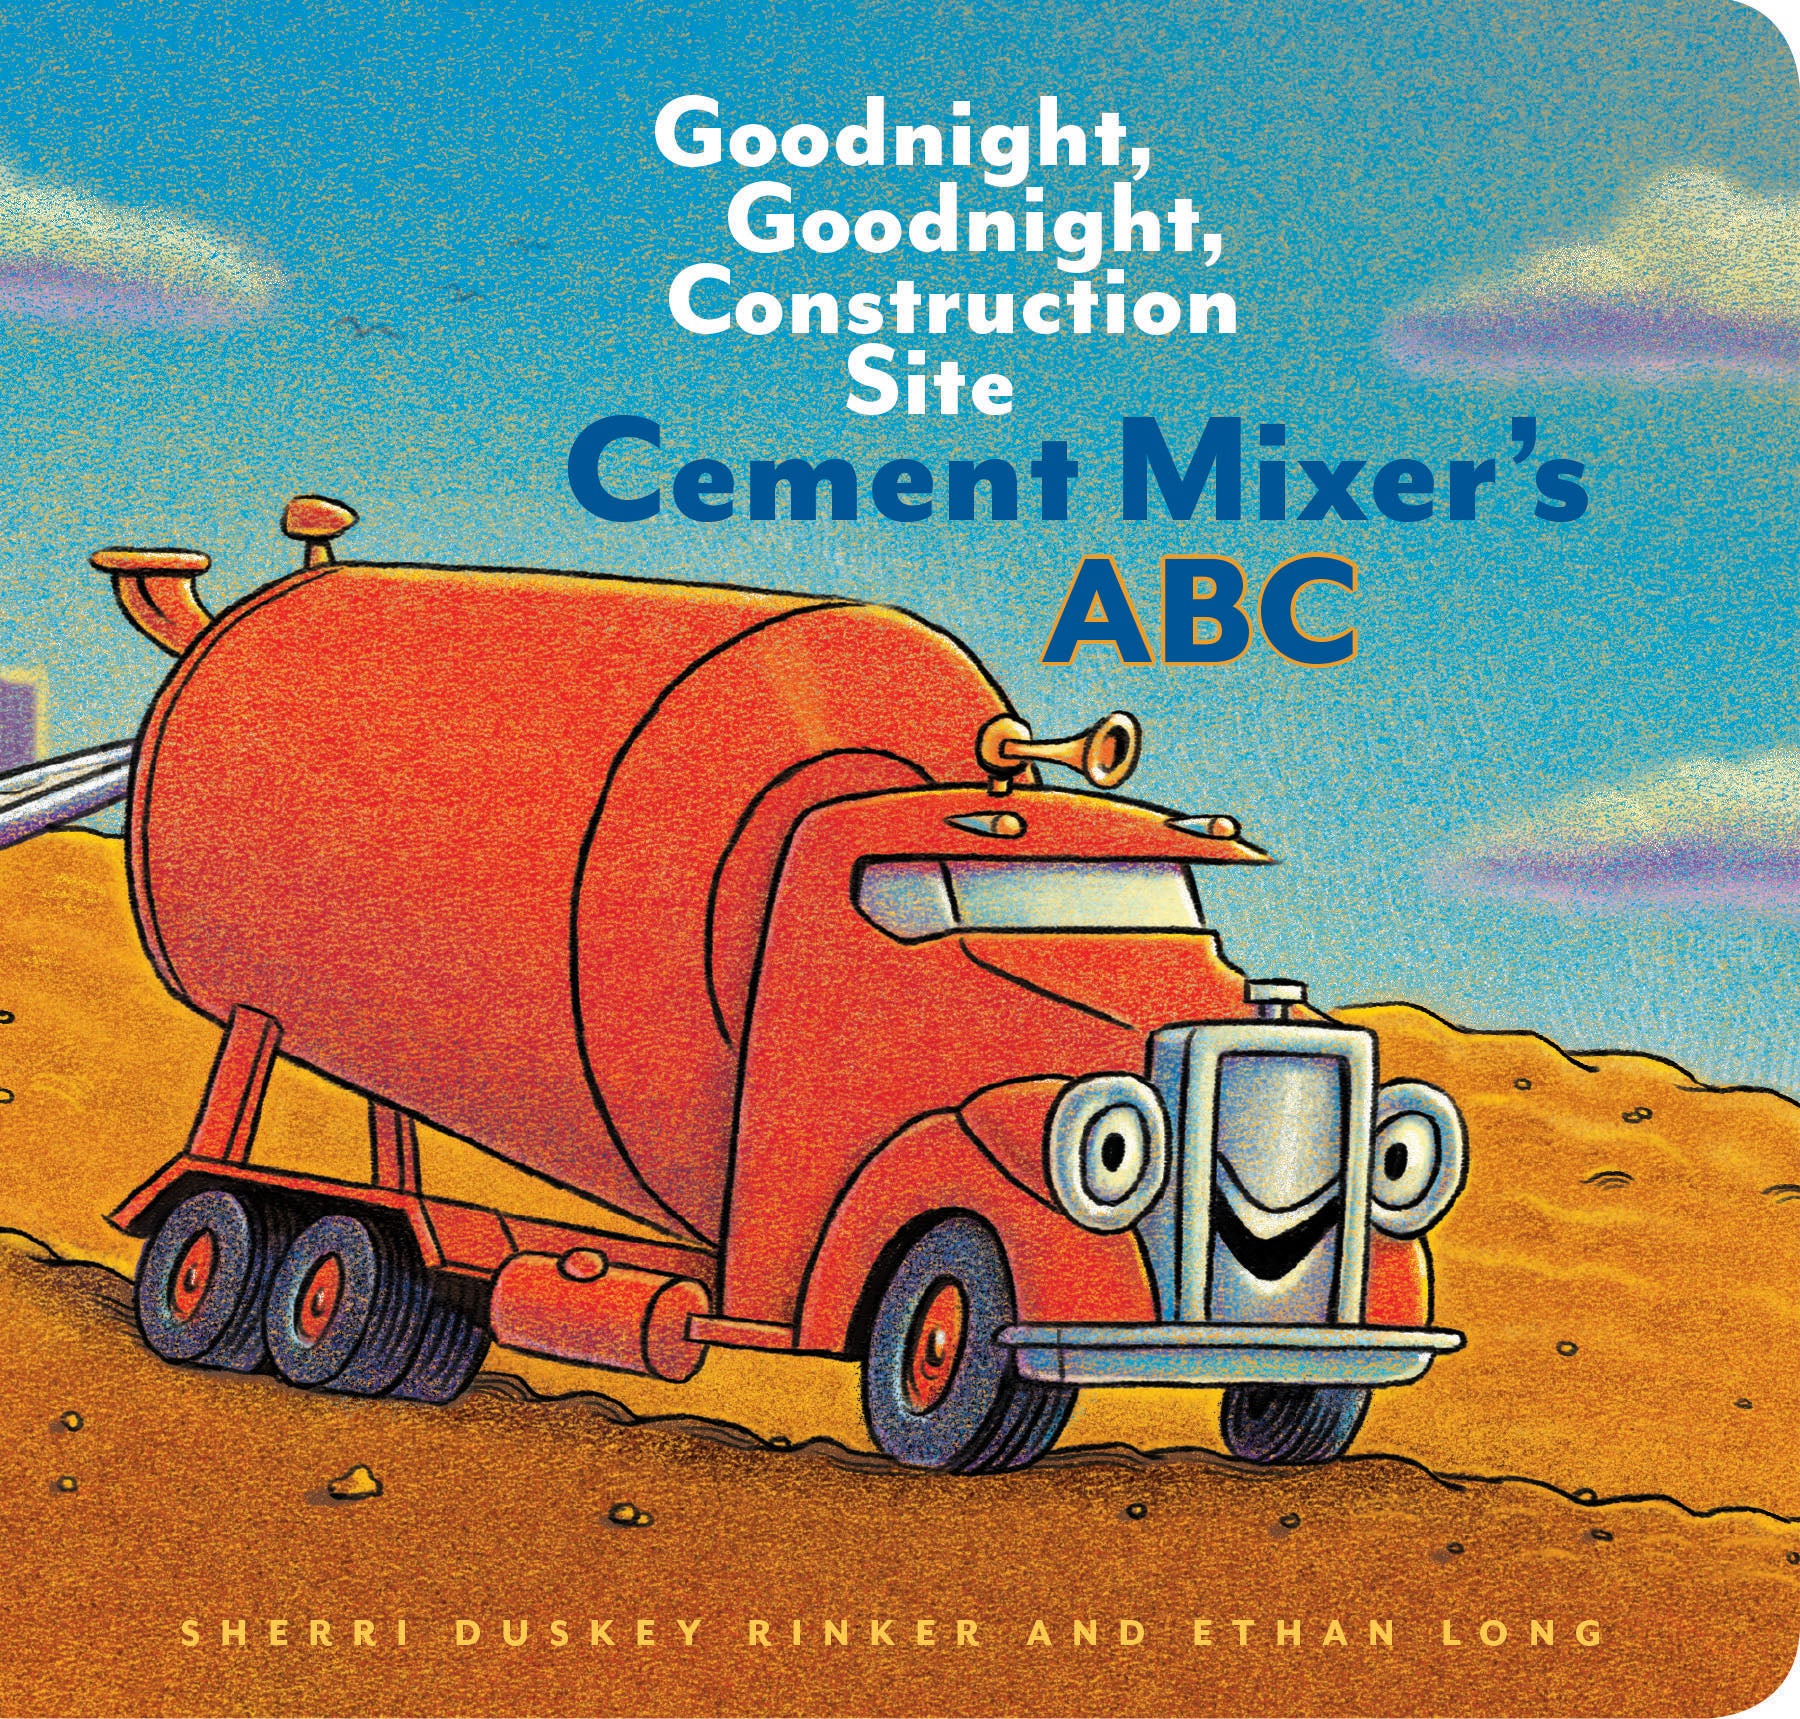 goodnight, goodnight, construction site cement mixer's ABC